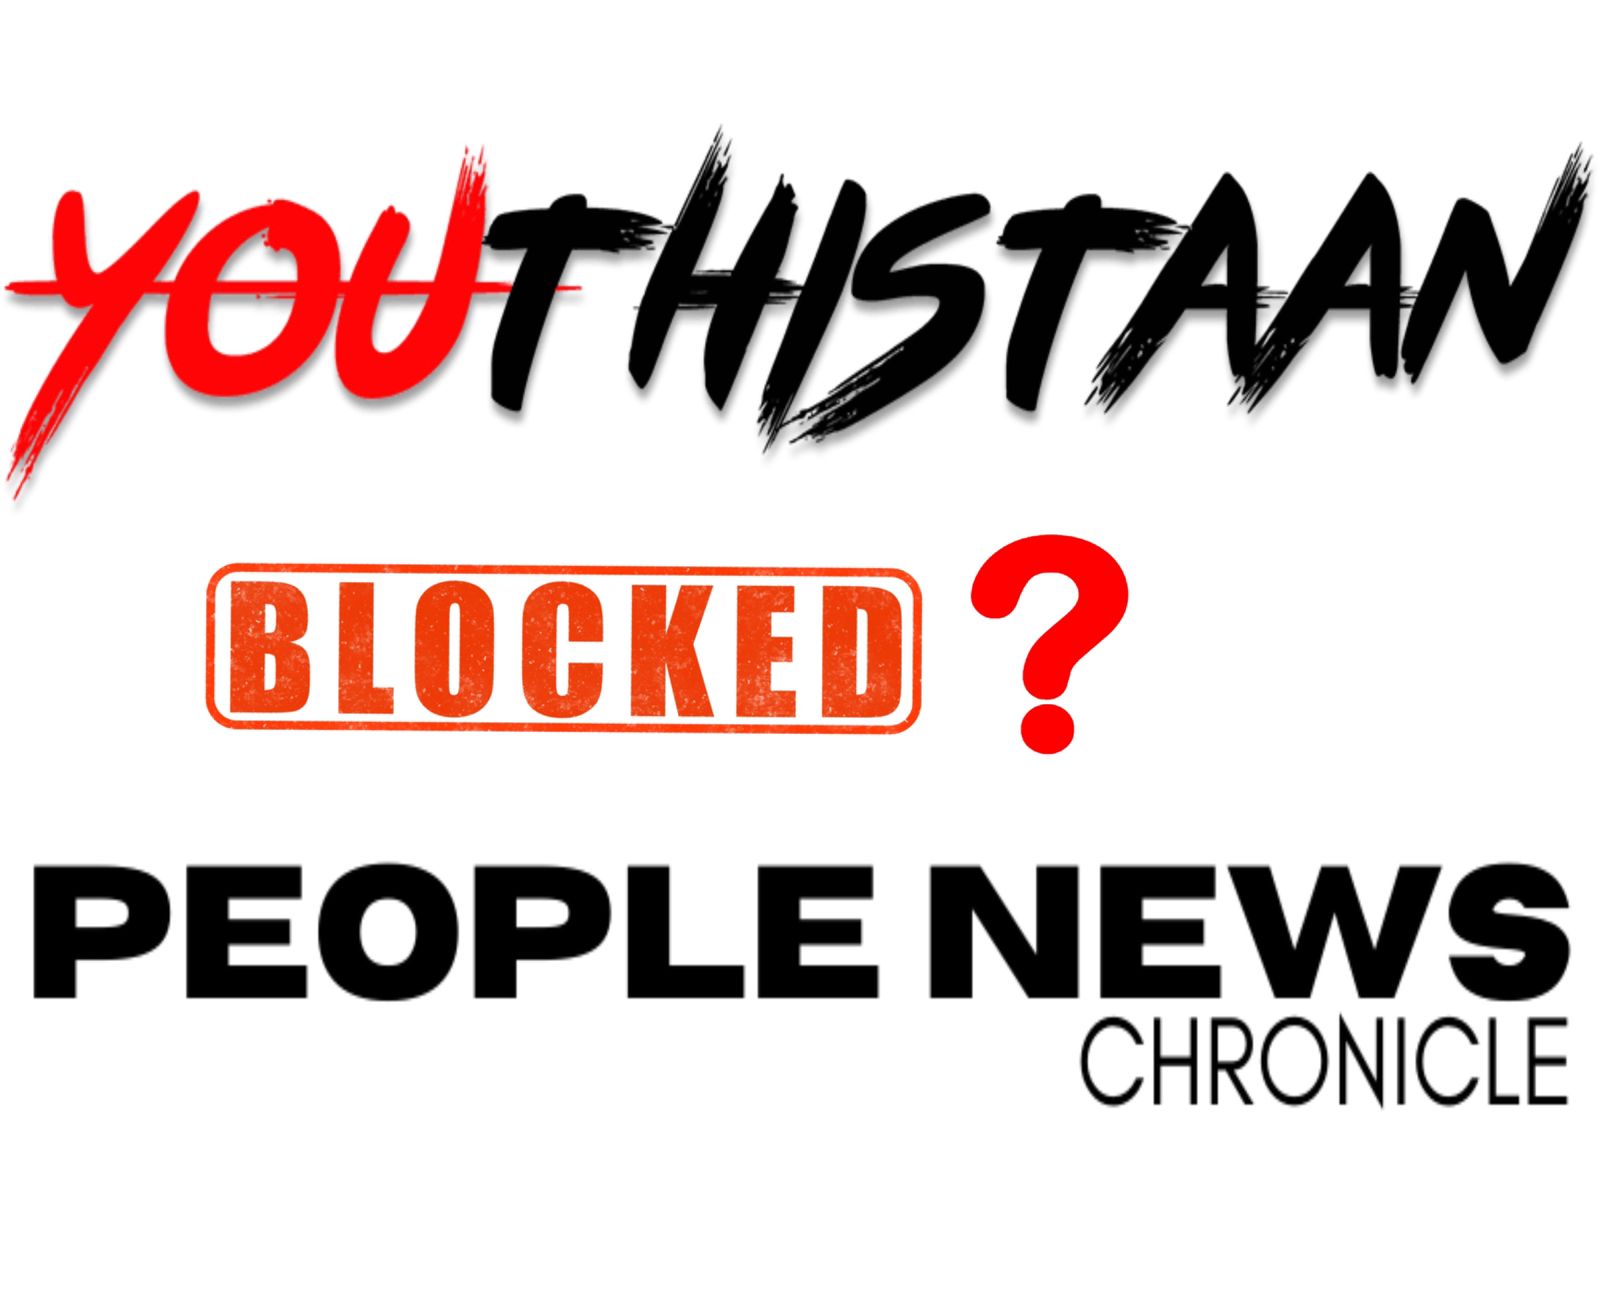 People News Chronicle and Youthistaan